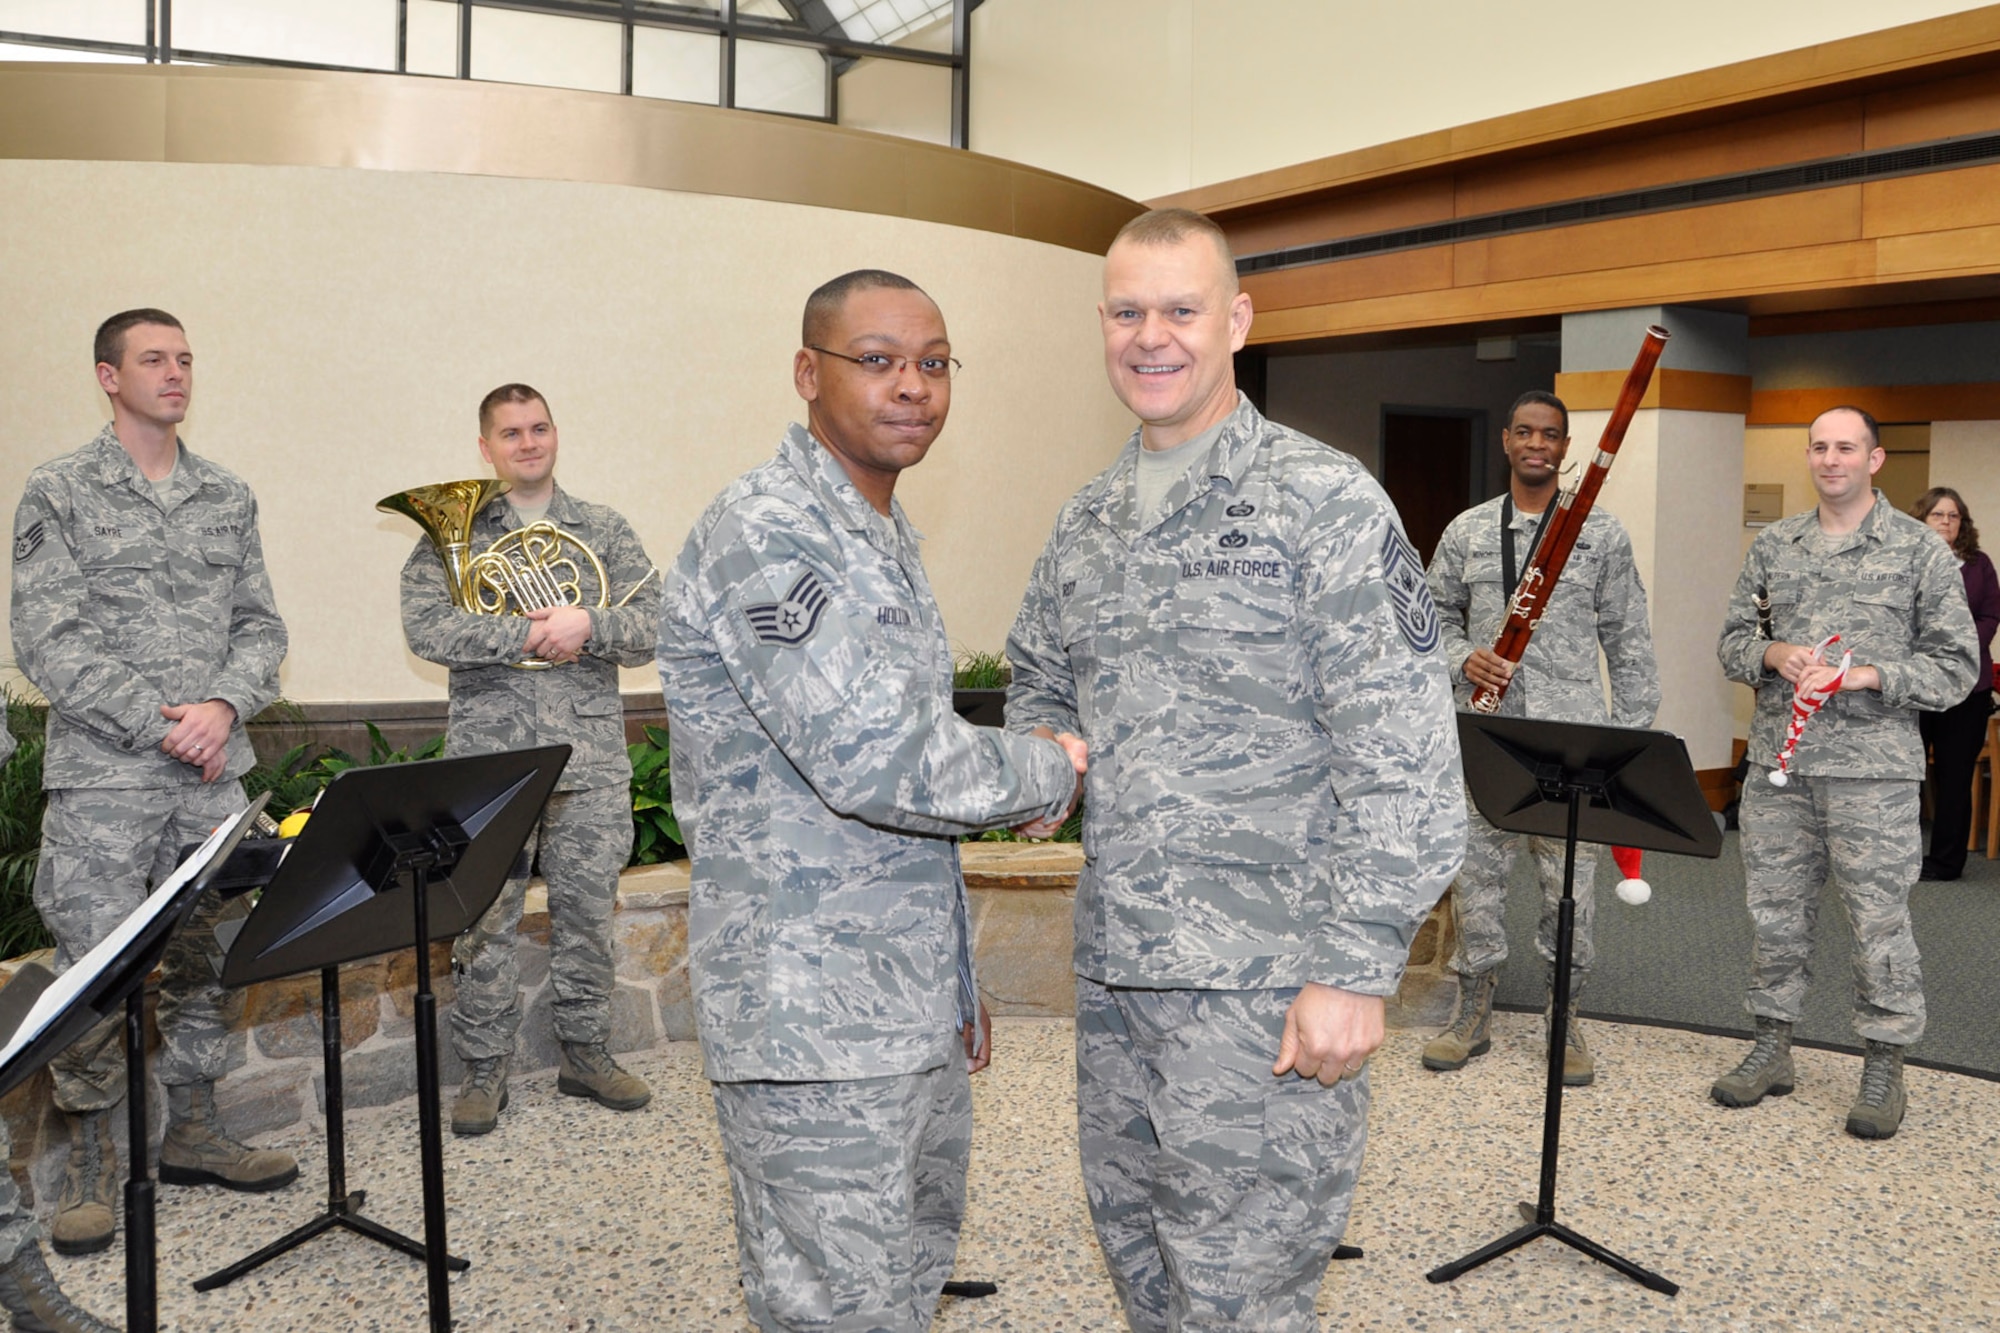 Chief Master Sgt. of the Air Force James A. Roy coins Staff Sgt. William White, 512th Memorial Affairs Squadron, for his work at the mortuary. Roy came to the Charles C. Carson Center for Mortuary Affairs as part of his farewell tour Dec. 12, 2012, to thank the men and women for their service to fallen heroes and their families. Roy, the 16th Chief Master Sergeant of the Air Force, will retire next month after more than 30 years of service. (U.S. Air Force photo/Master Sgt. Cherie McNeill)
